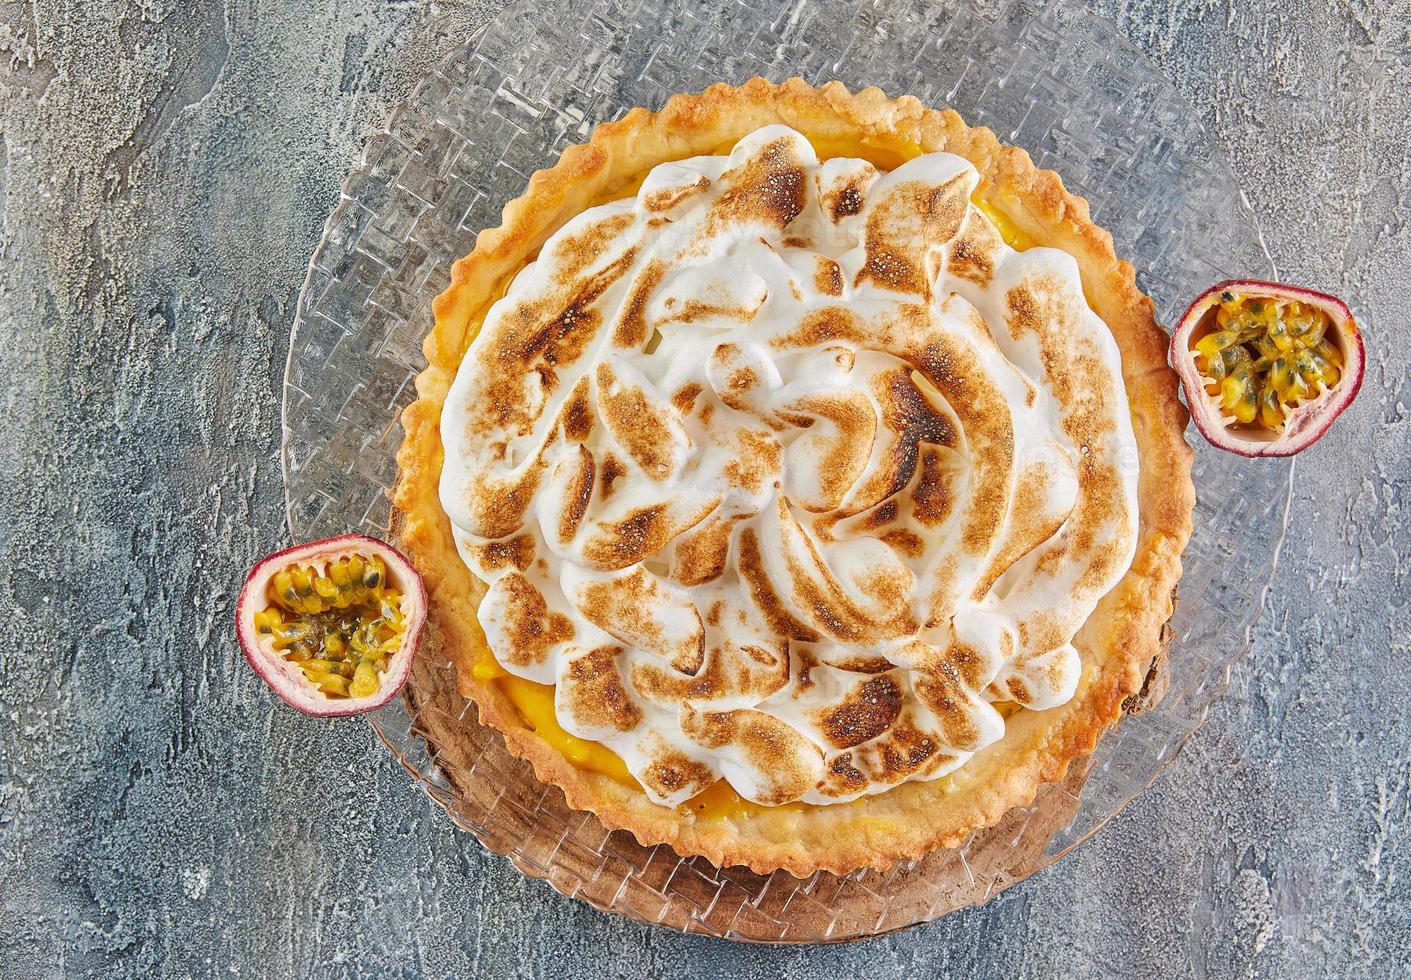 Passion flower pie on plate with pasiflora halves. French gourmet cuisine photo